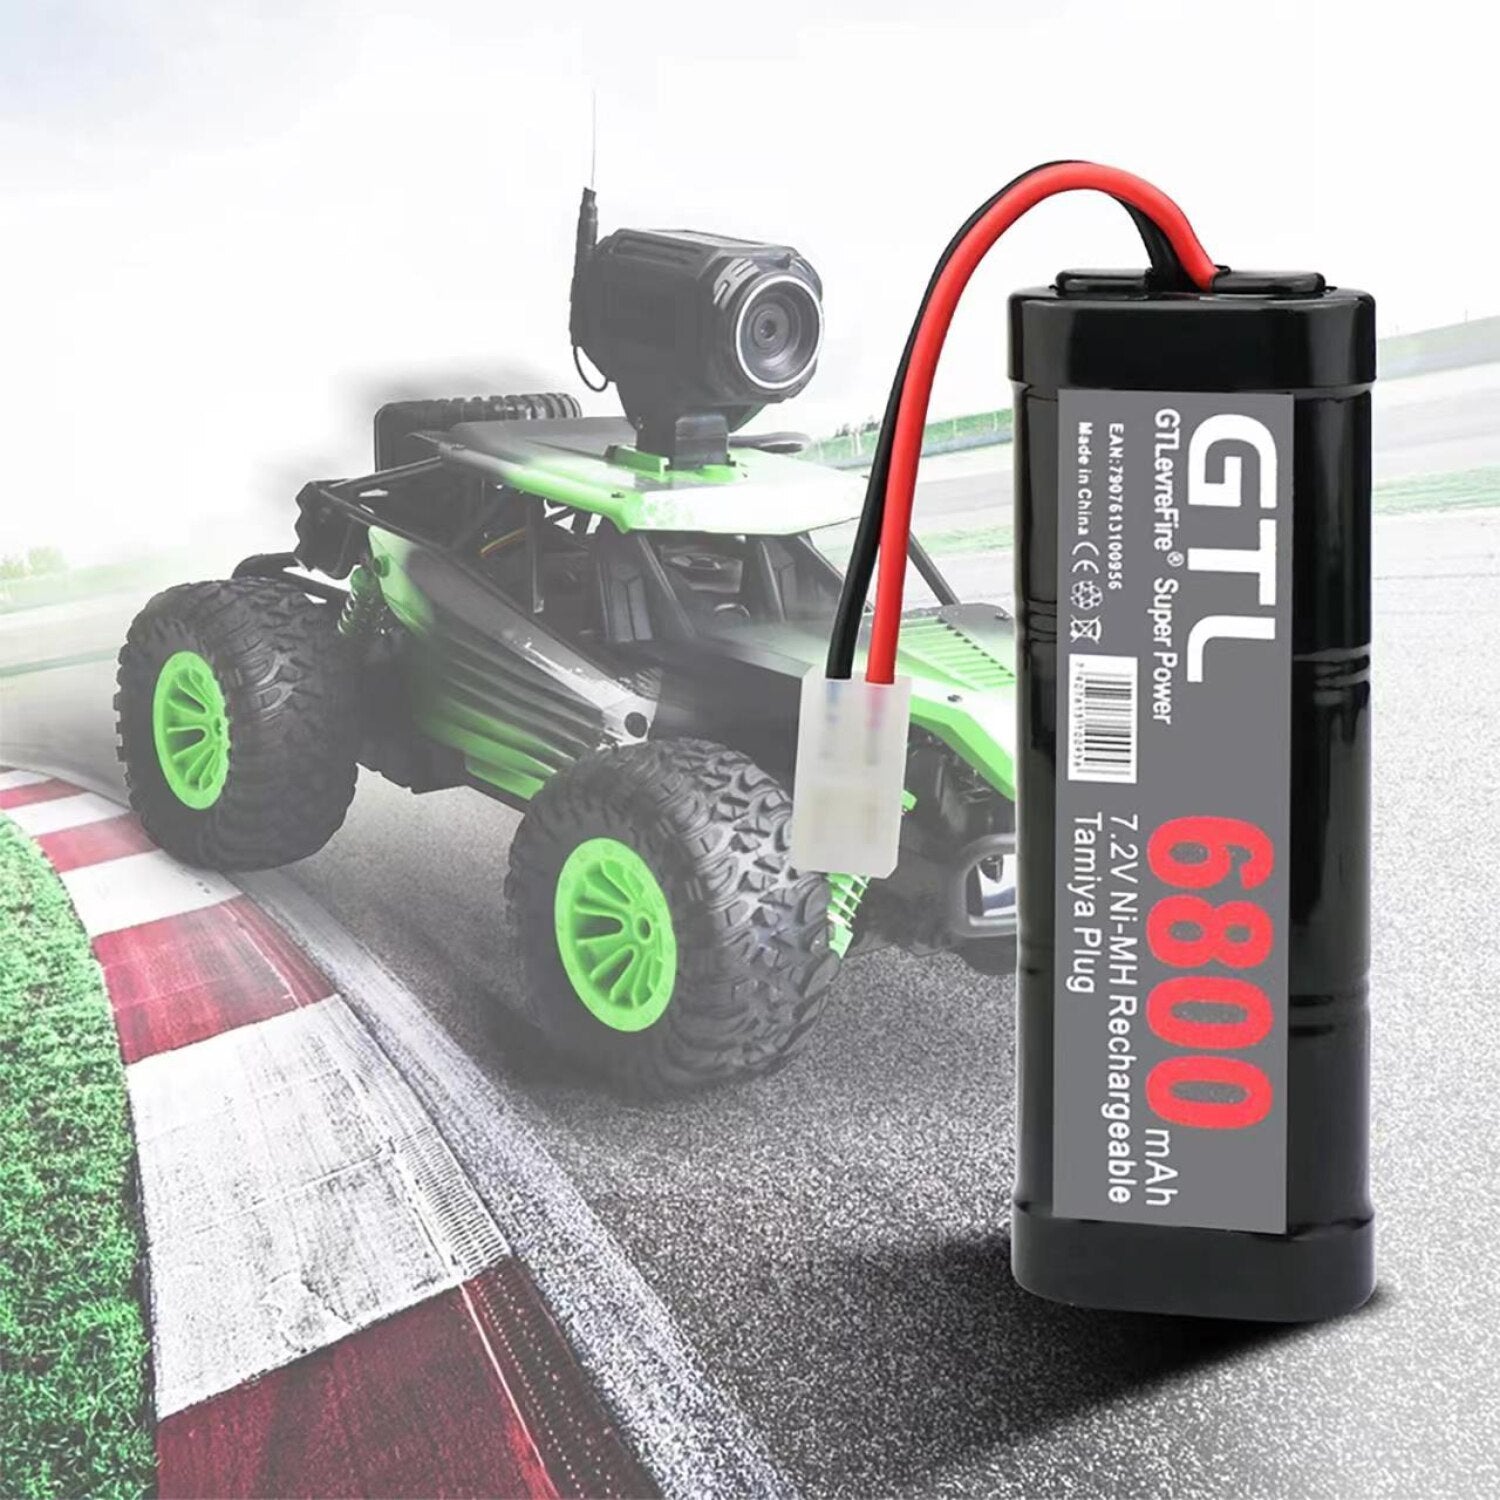 Mkepa 7.2V 6800mAh NiMH Replacement RC Battery with Tamiya Discharge Connector for RC Toys Racing Cars Boat Aircraft